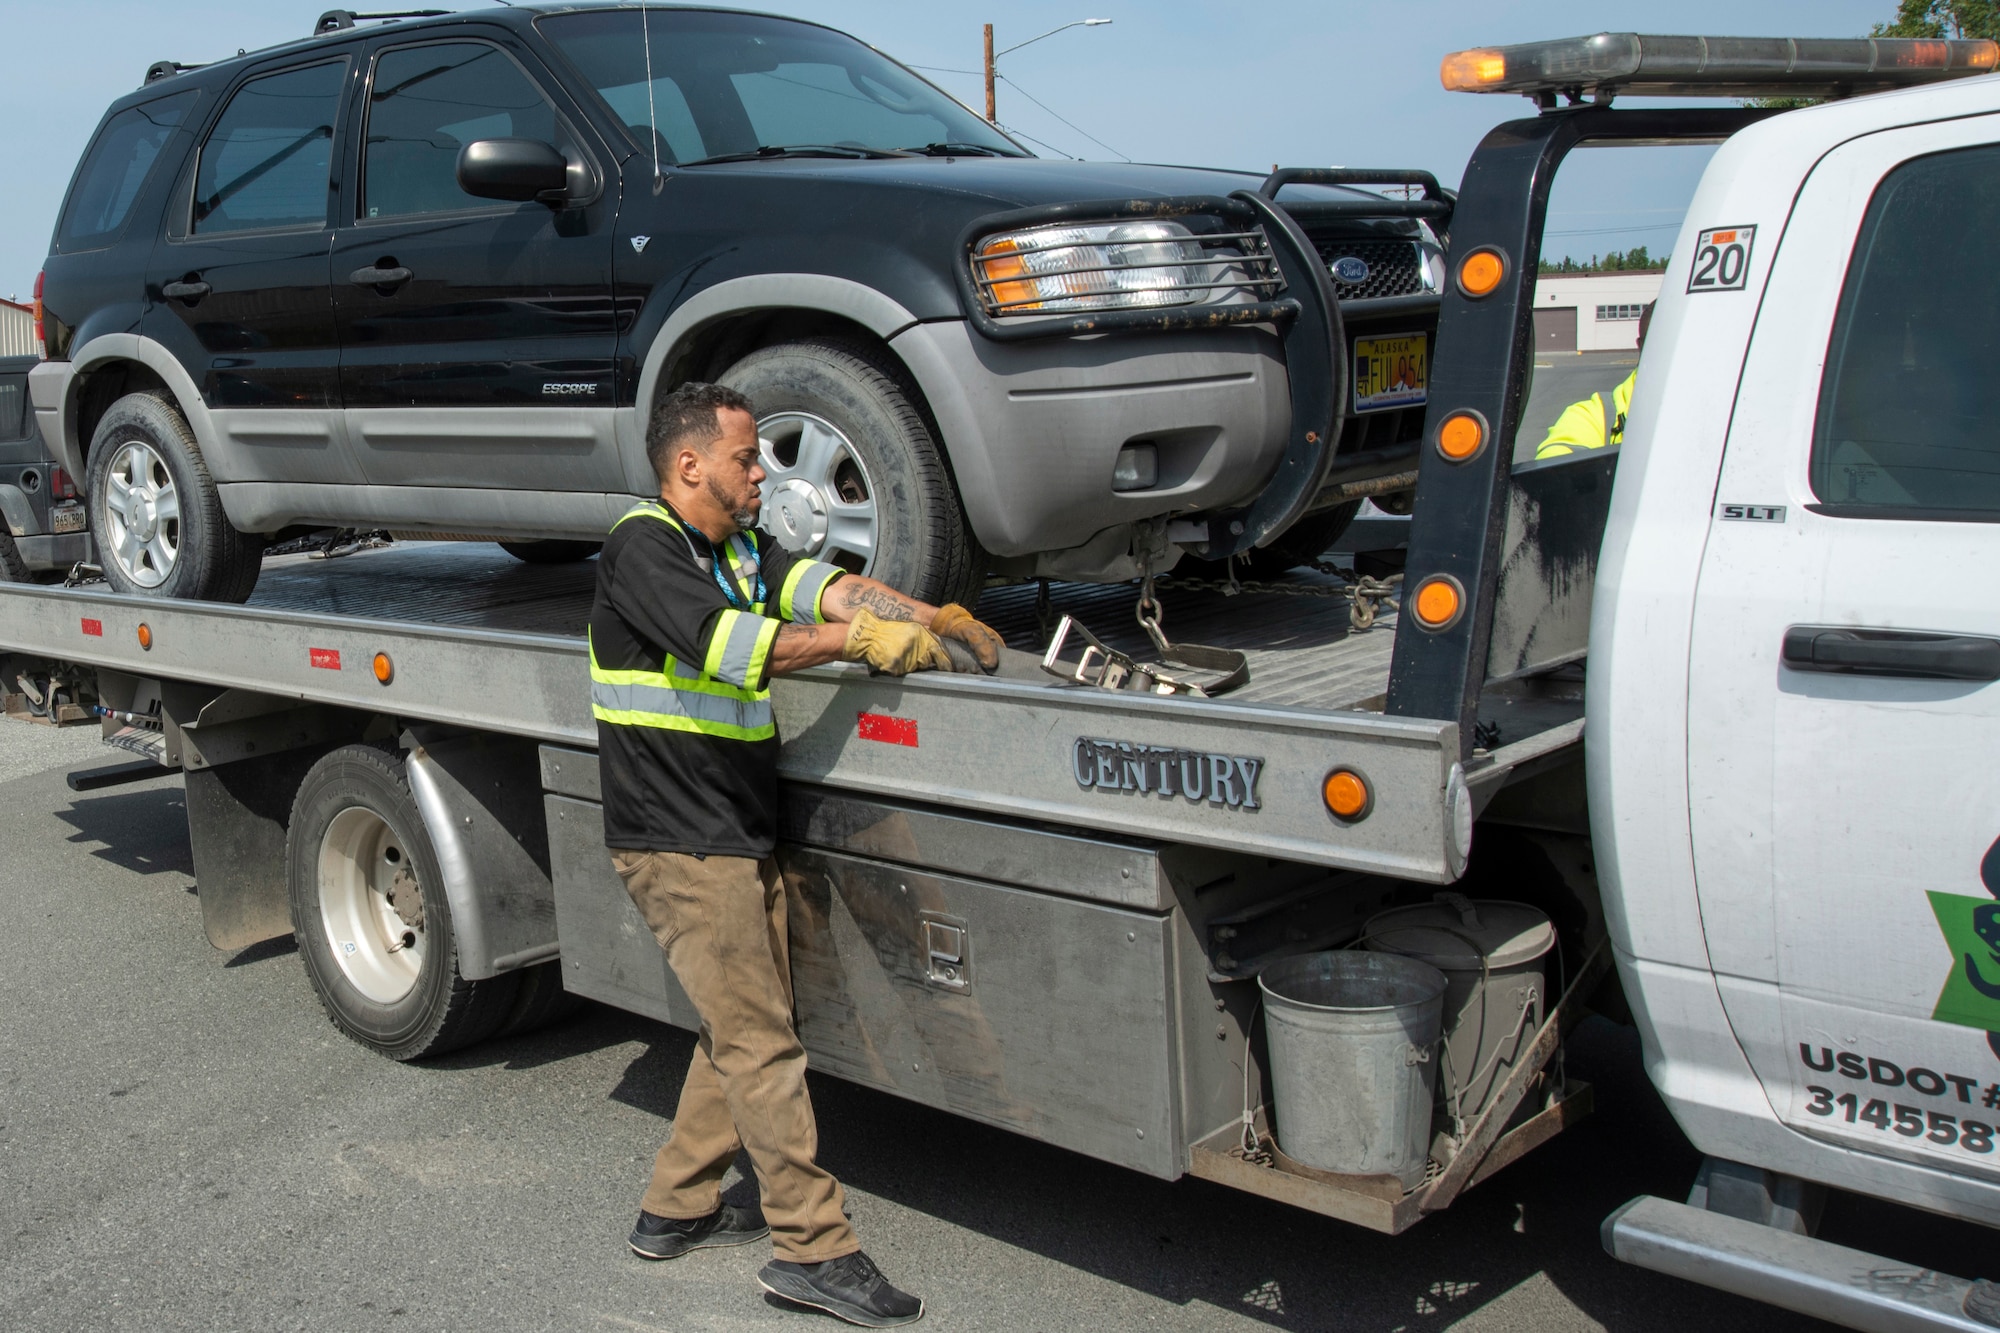 Edison Minyatty, an assistant tow truck operator with JT Towing LLC, tightens a strap to secure a vehicle to a tow truck July 1, 2019, on Joint Base Elmendorf-Richardson, Alaska. Abandoned and illegally parked vehicles on Joint Base Elmendorf-Richardson, Alaska, are towed because they present safety hazards.